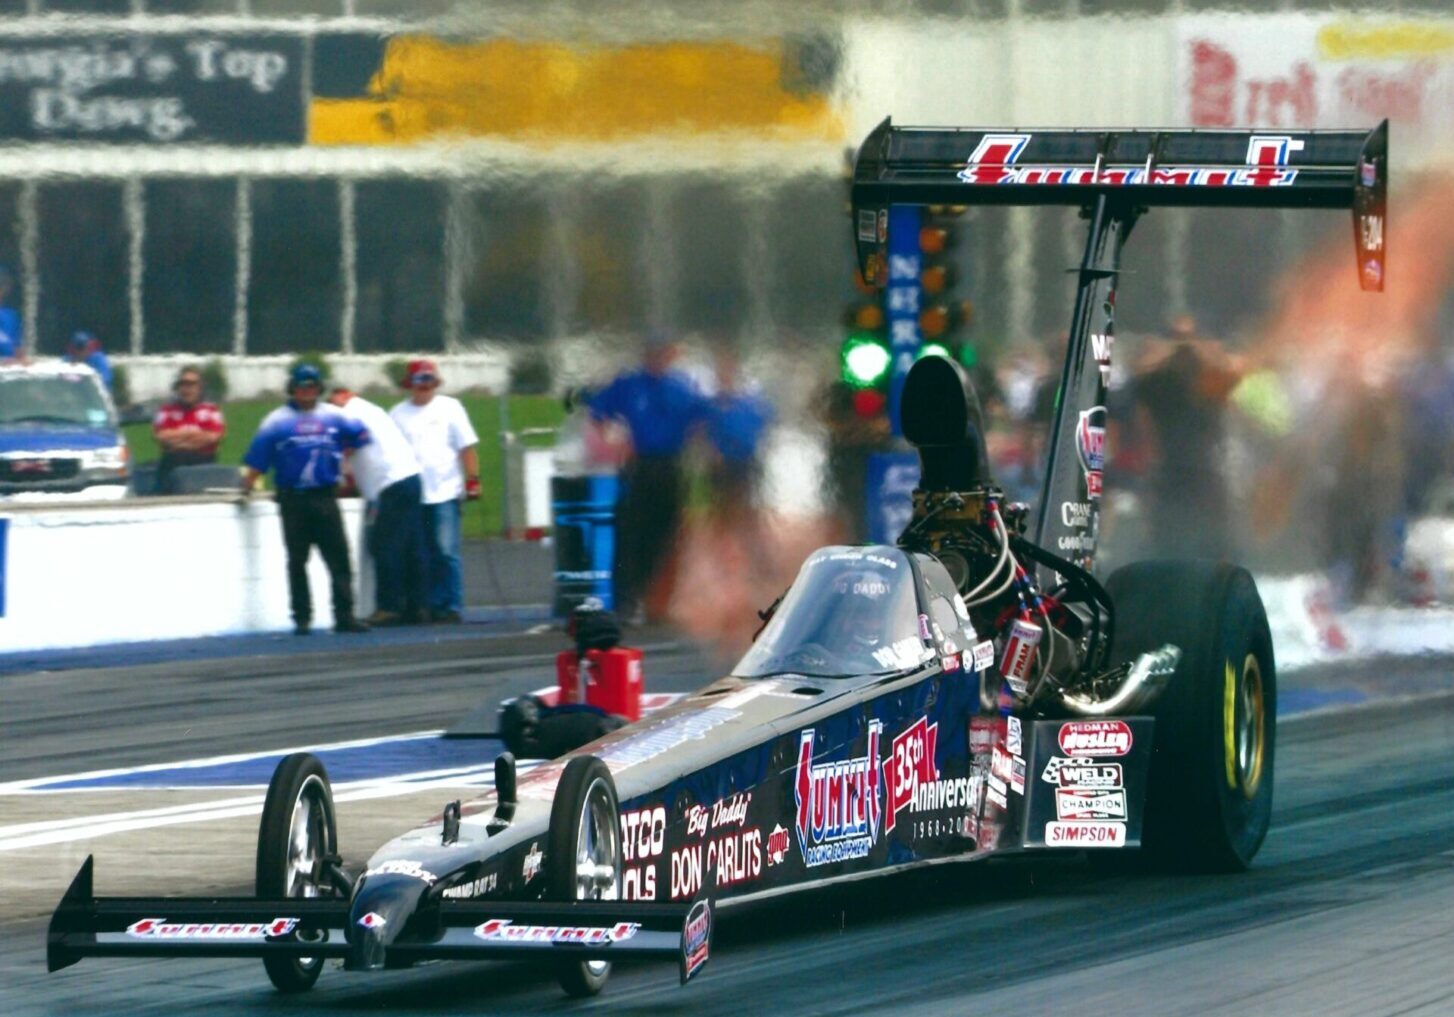 A drag racer competing in a thrilling drag race on a track.